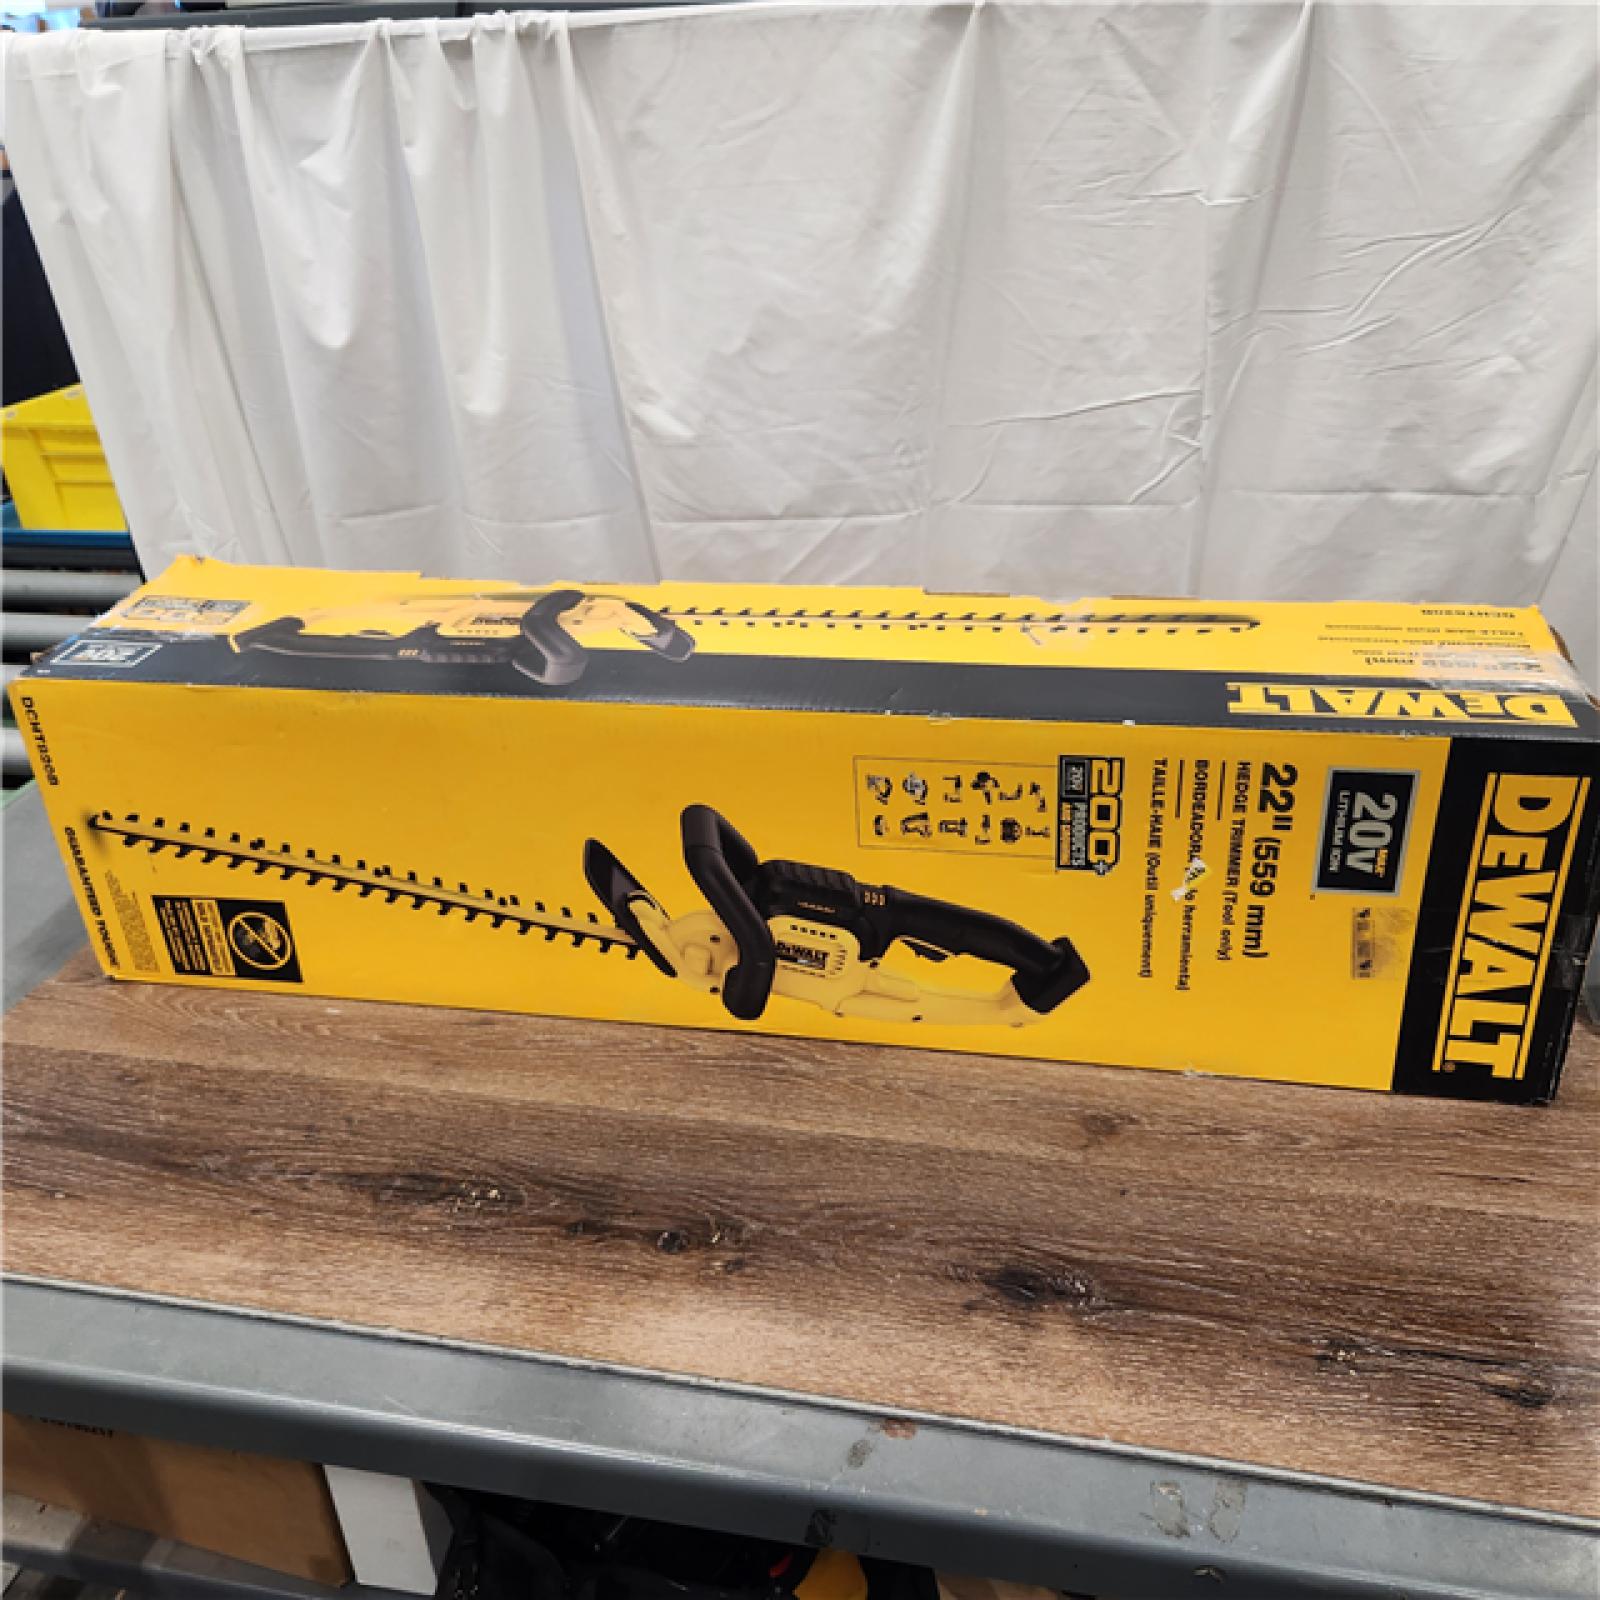 AS-IS Dewalt 20V MAX Lithium Ion Hedge Trimmer Bare Tool Only